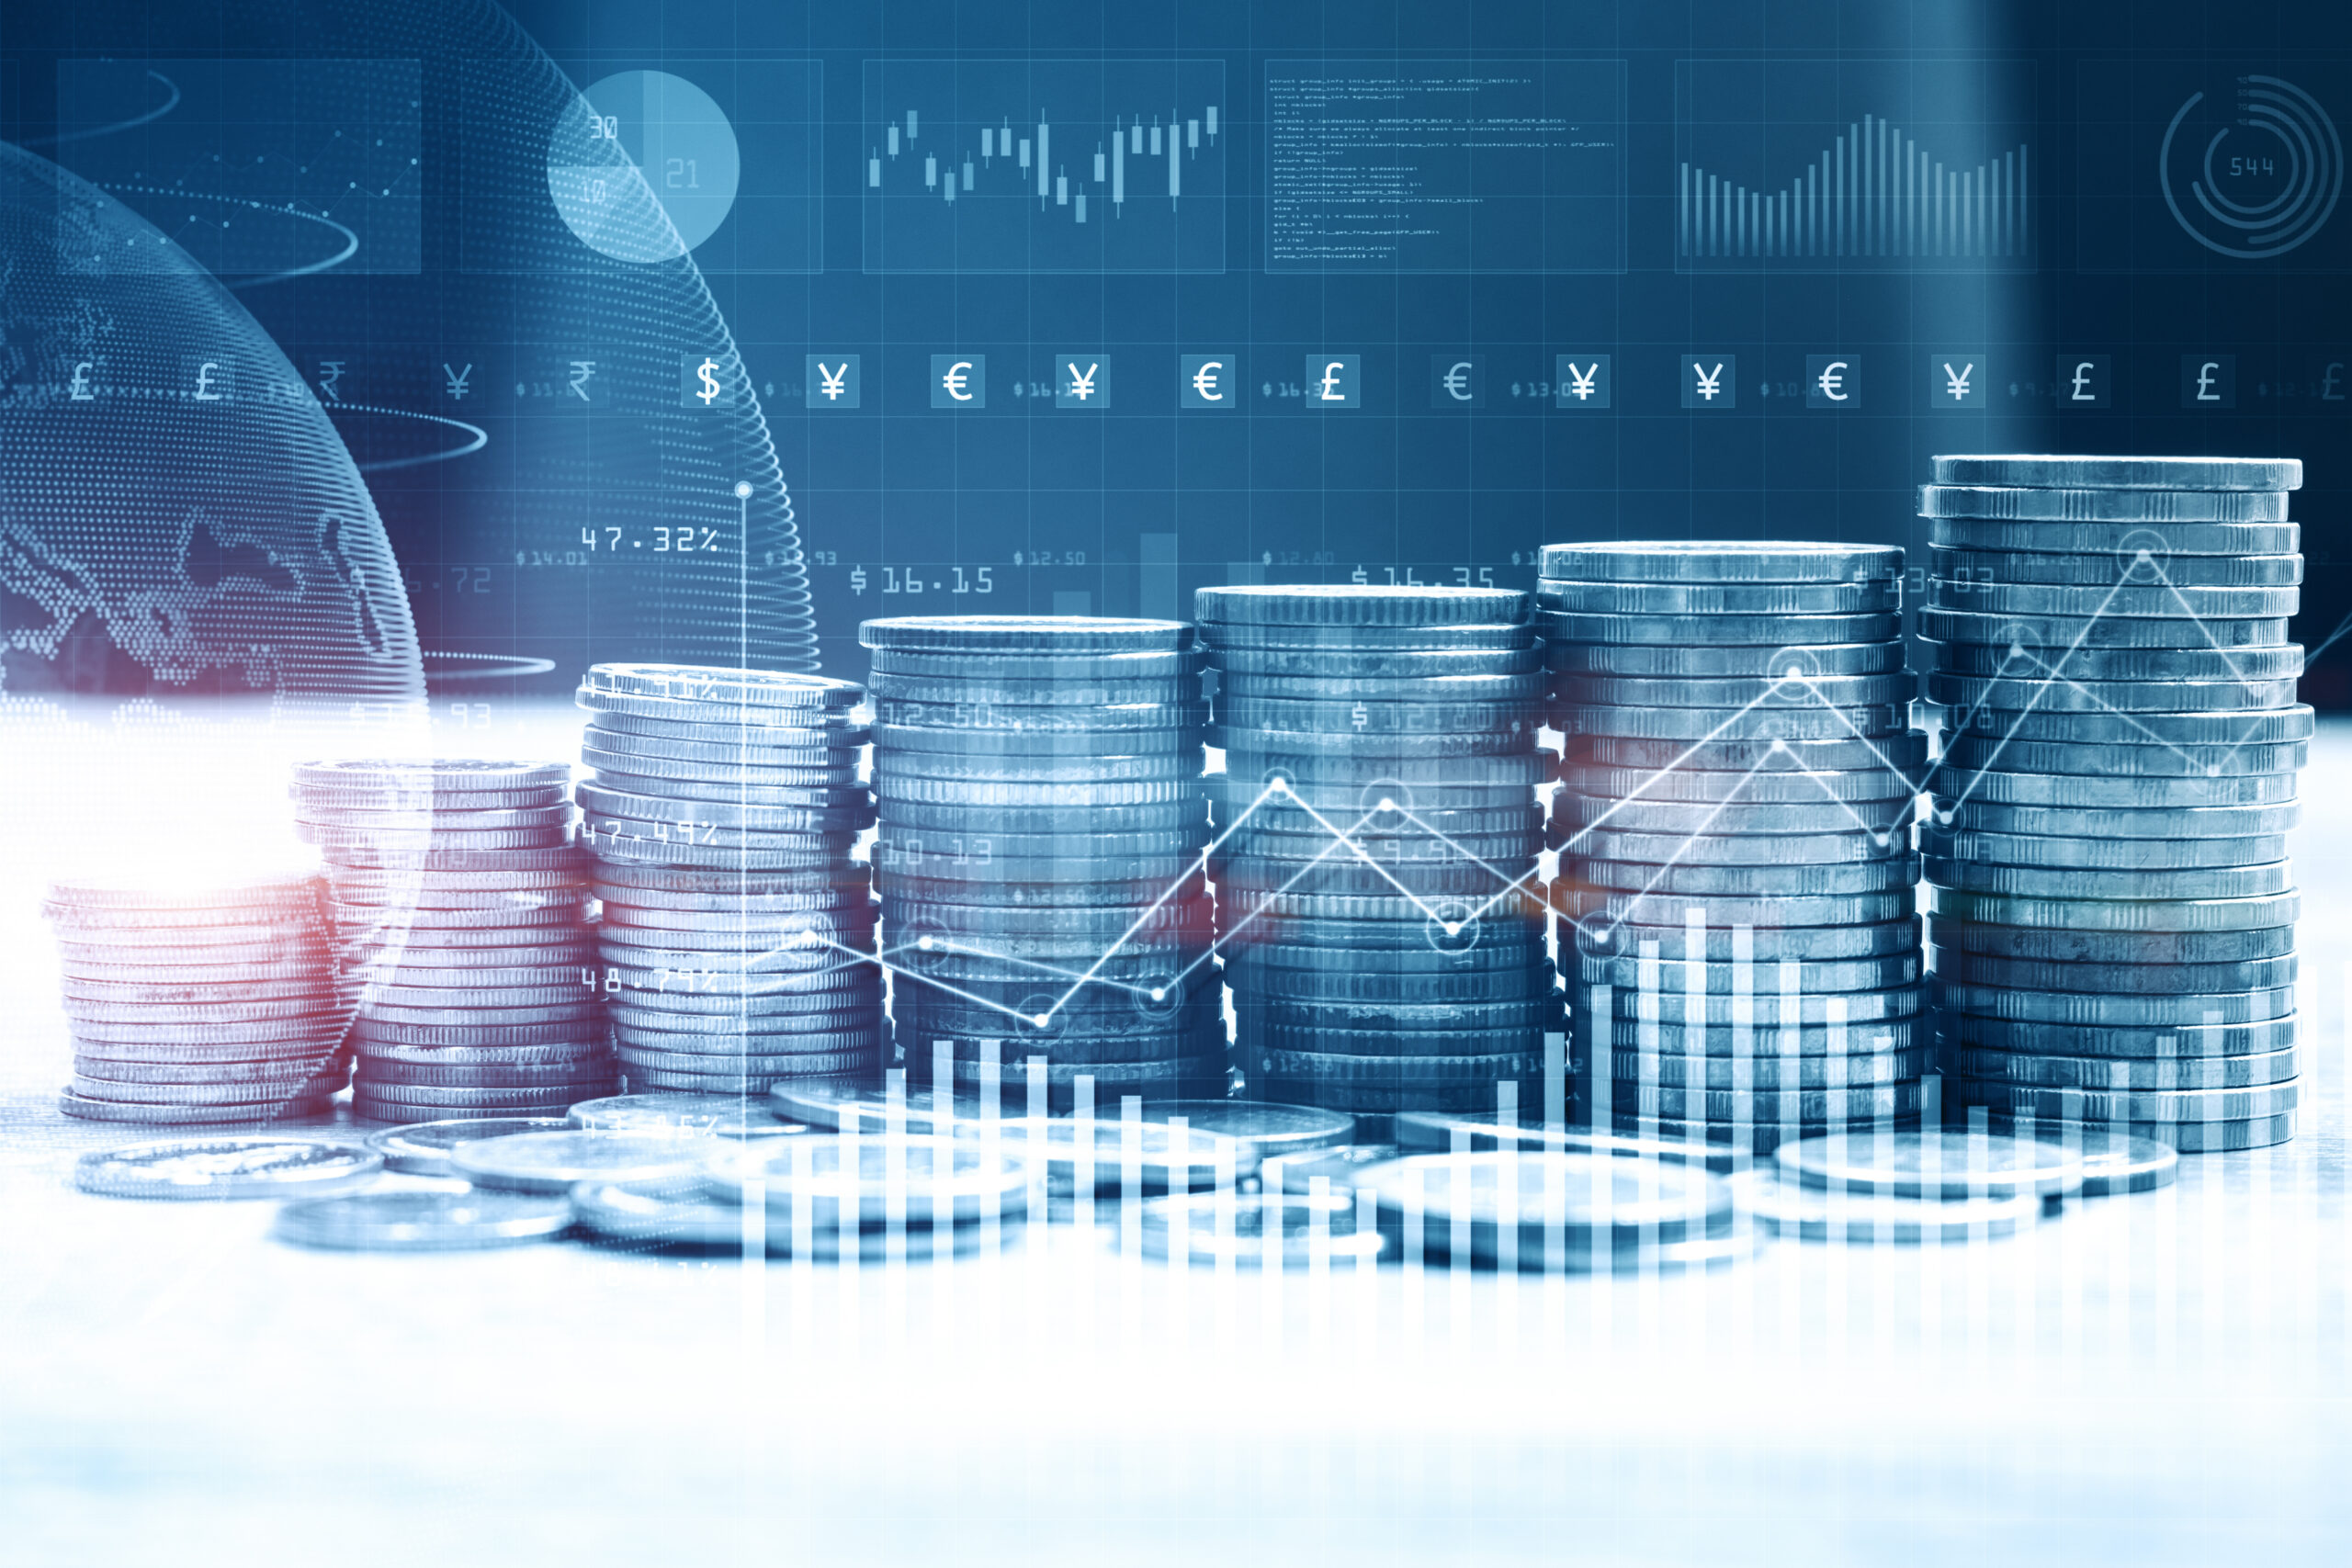 3D rendering showing stacks of coins against a backdrop of trading graphs and financial diagrams.